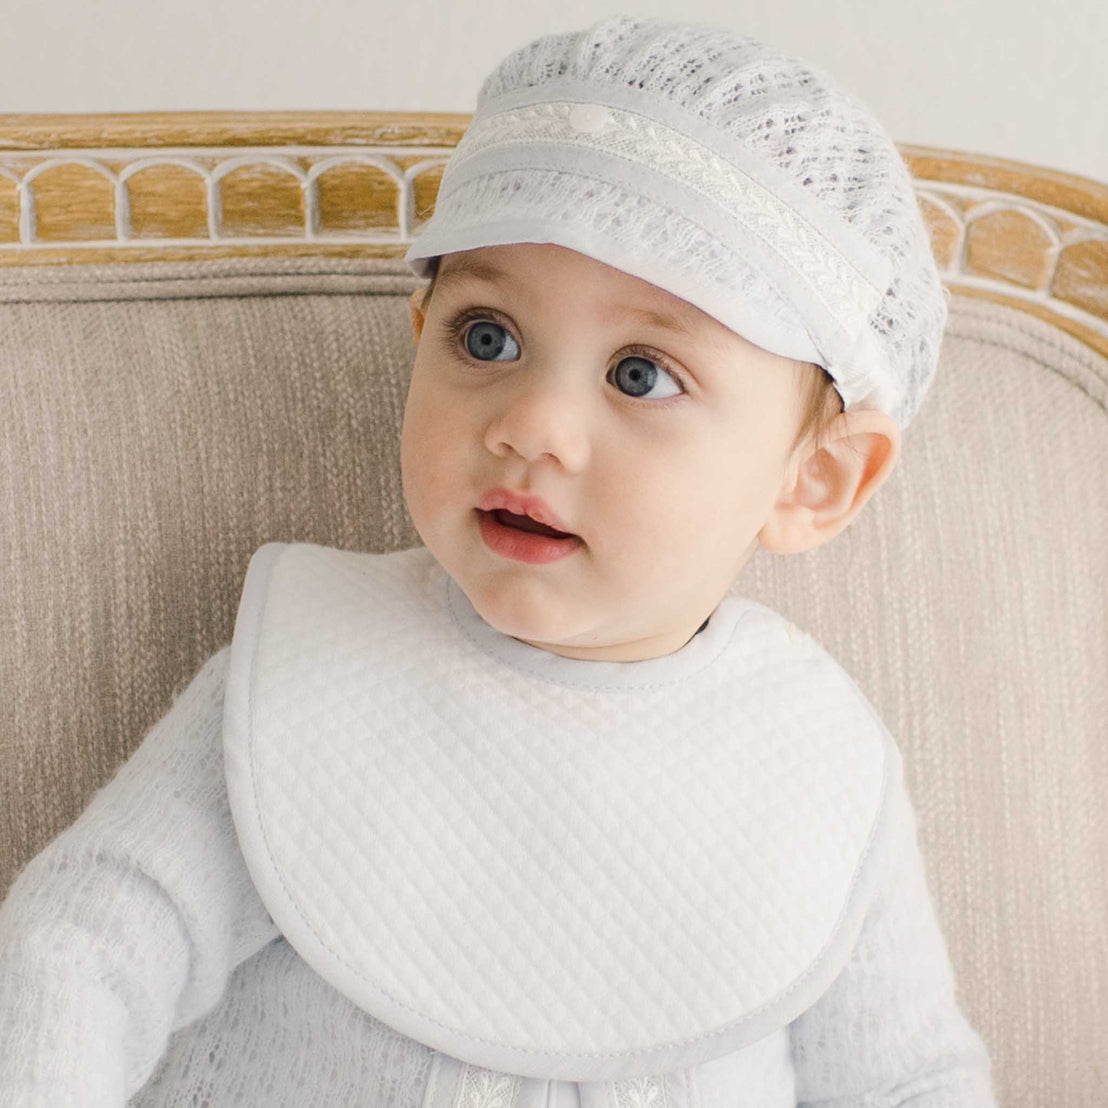 A baby boy wears the Harrison Bib made with a soft textured white cotton and features blue linen binding around the perimeter. He is also wearing the Harrison Knit Hat